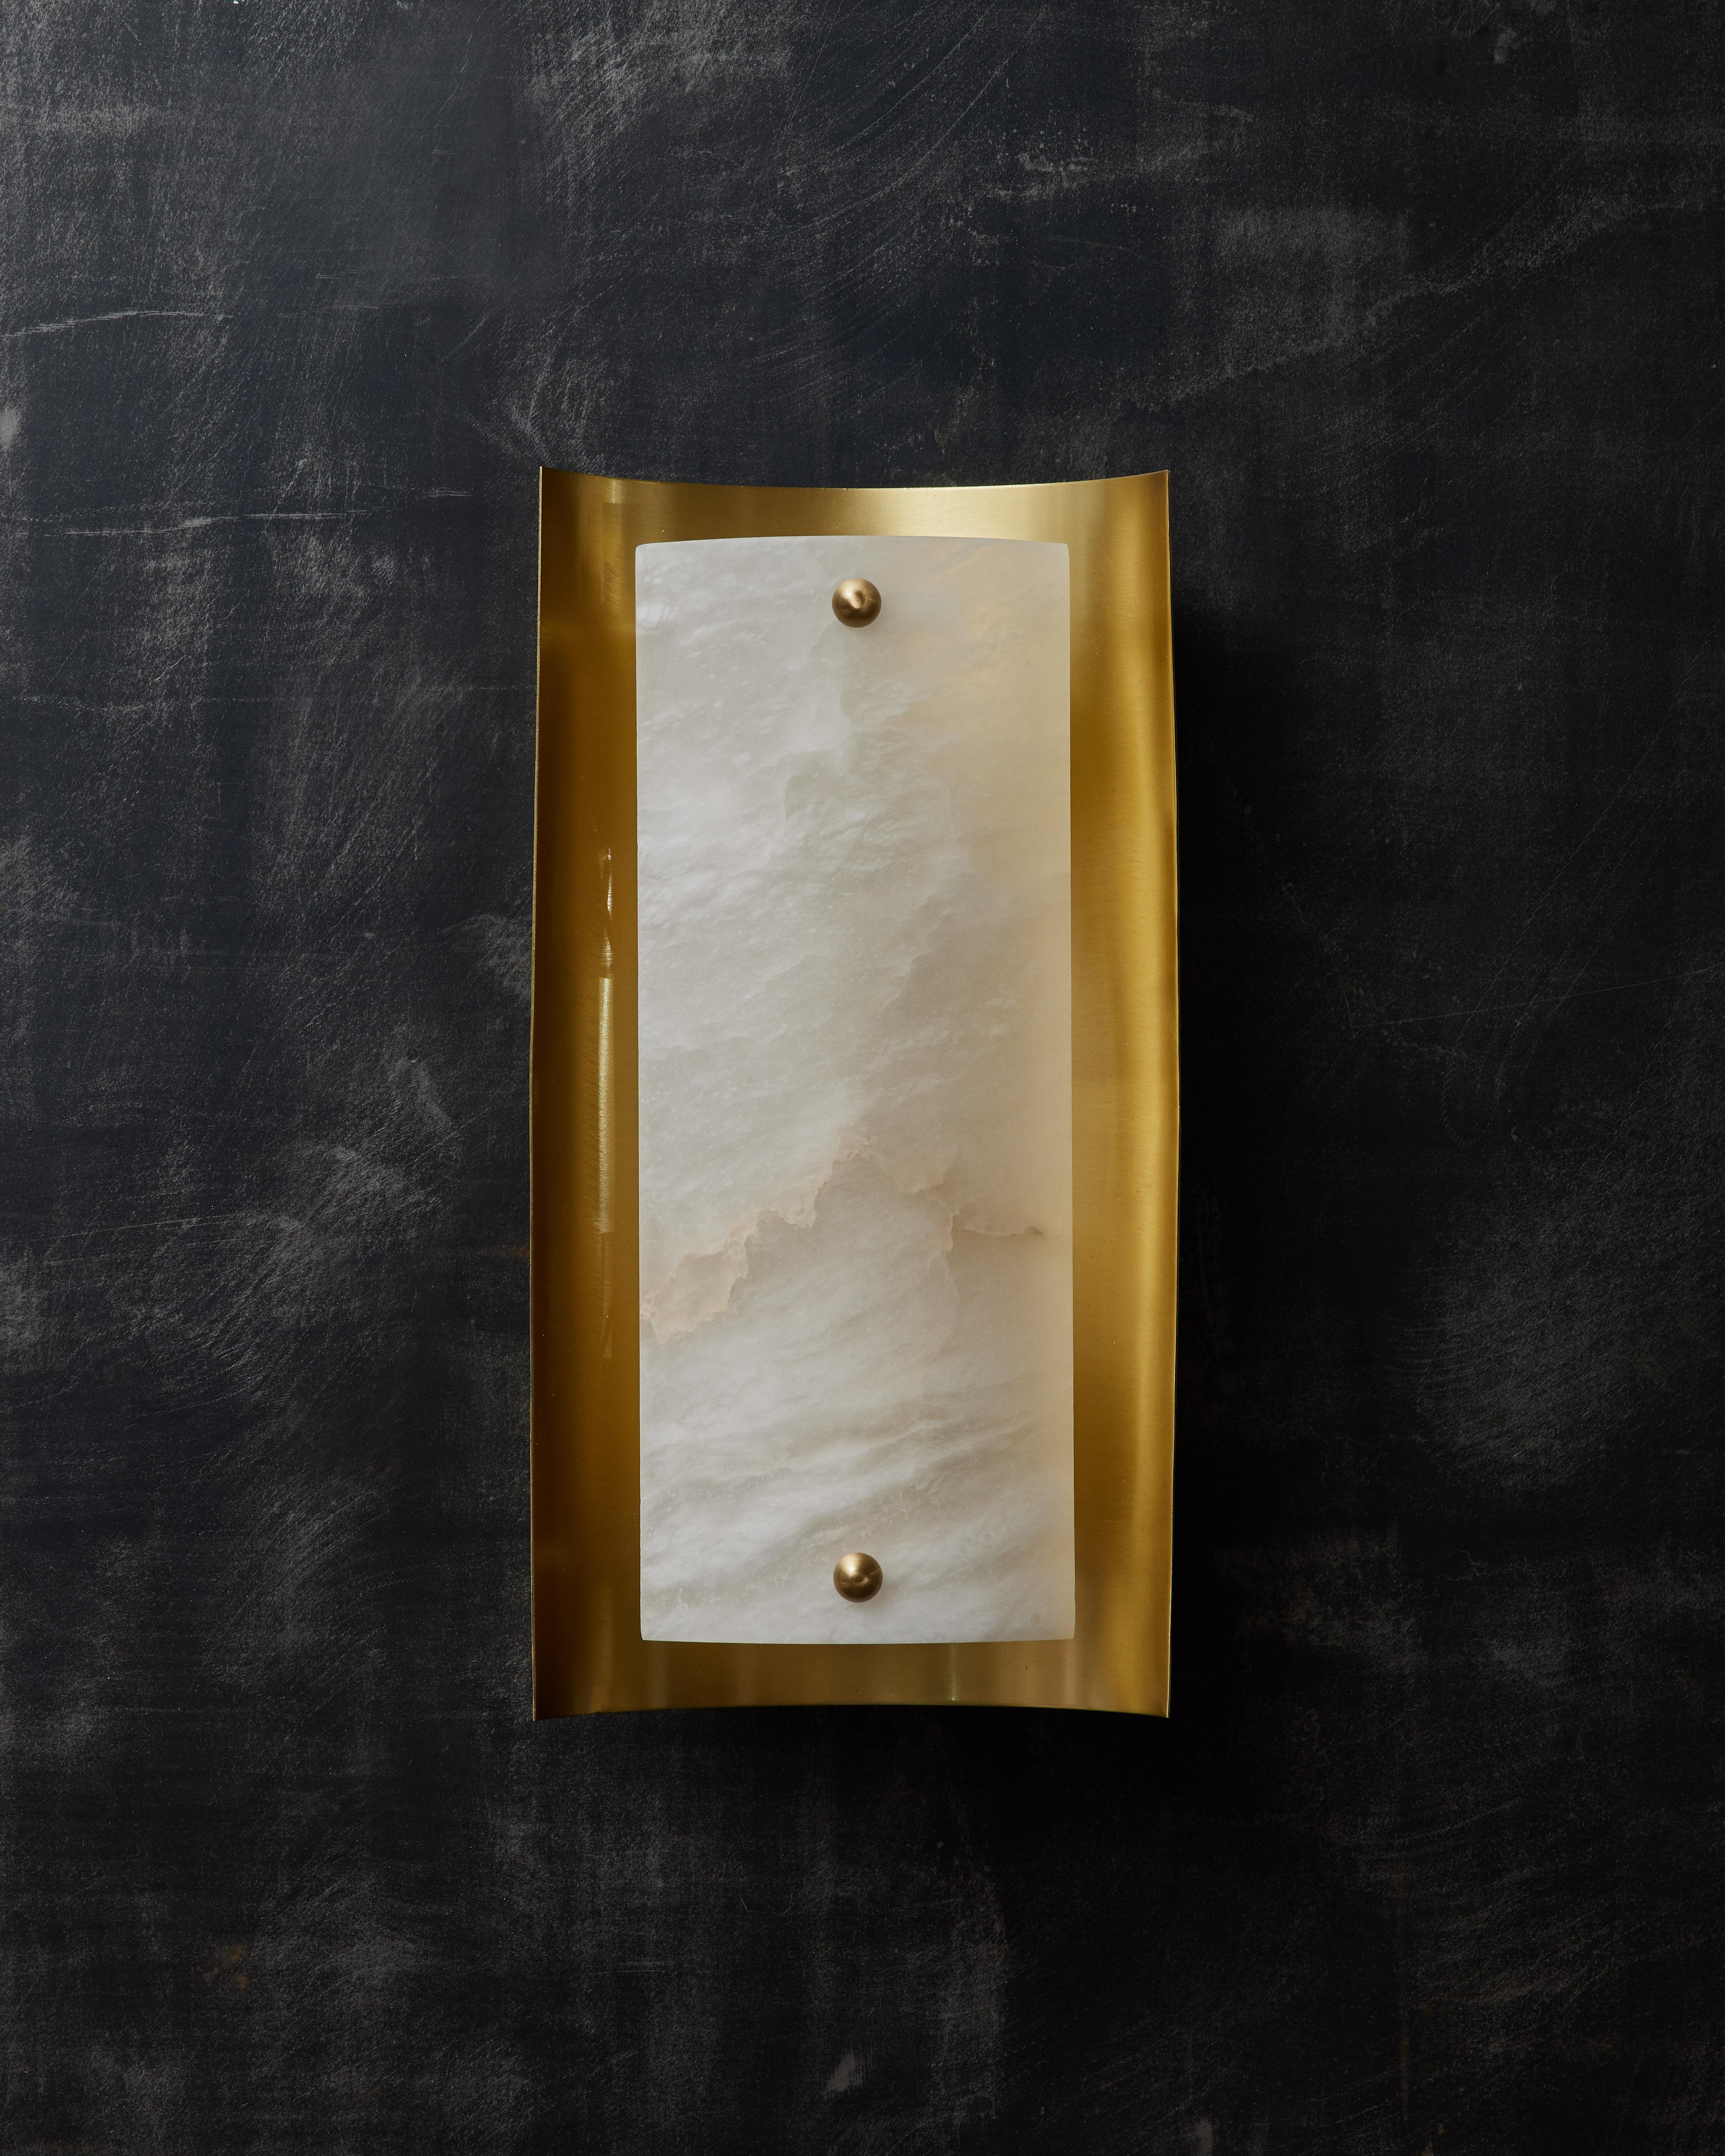 Wall sconce designed by Glustin Luminaires made of a concave satin brass reflector and a convex alabaster diffuser for the source of light.